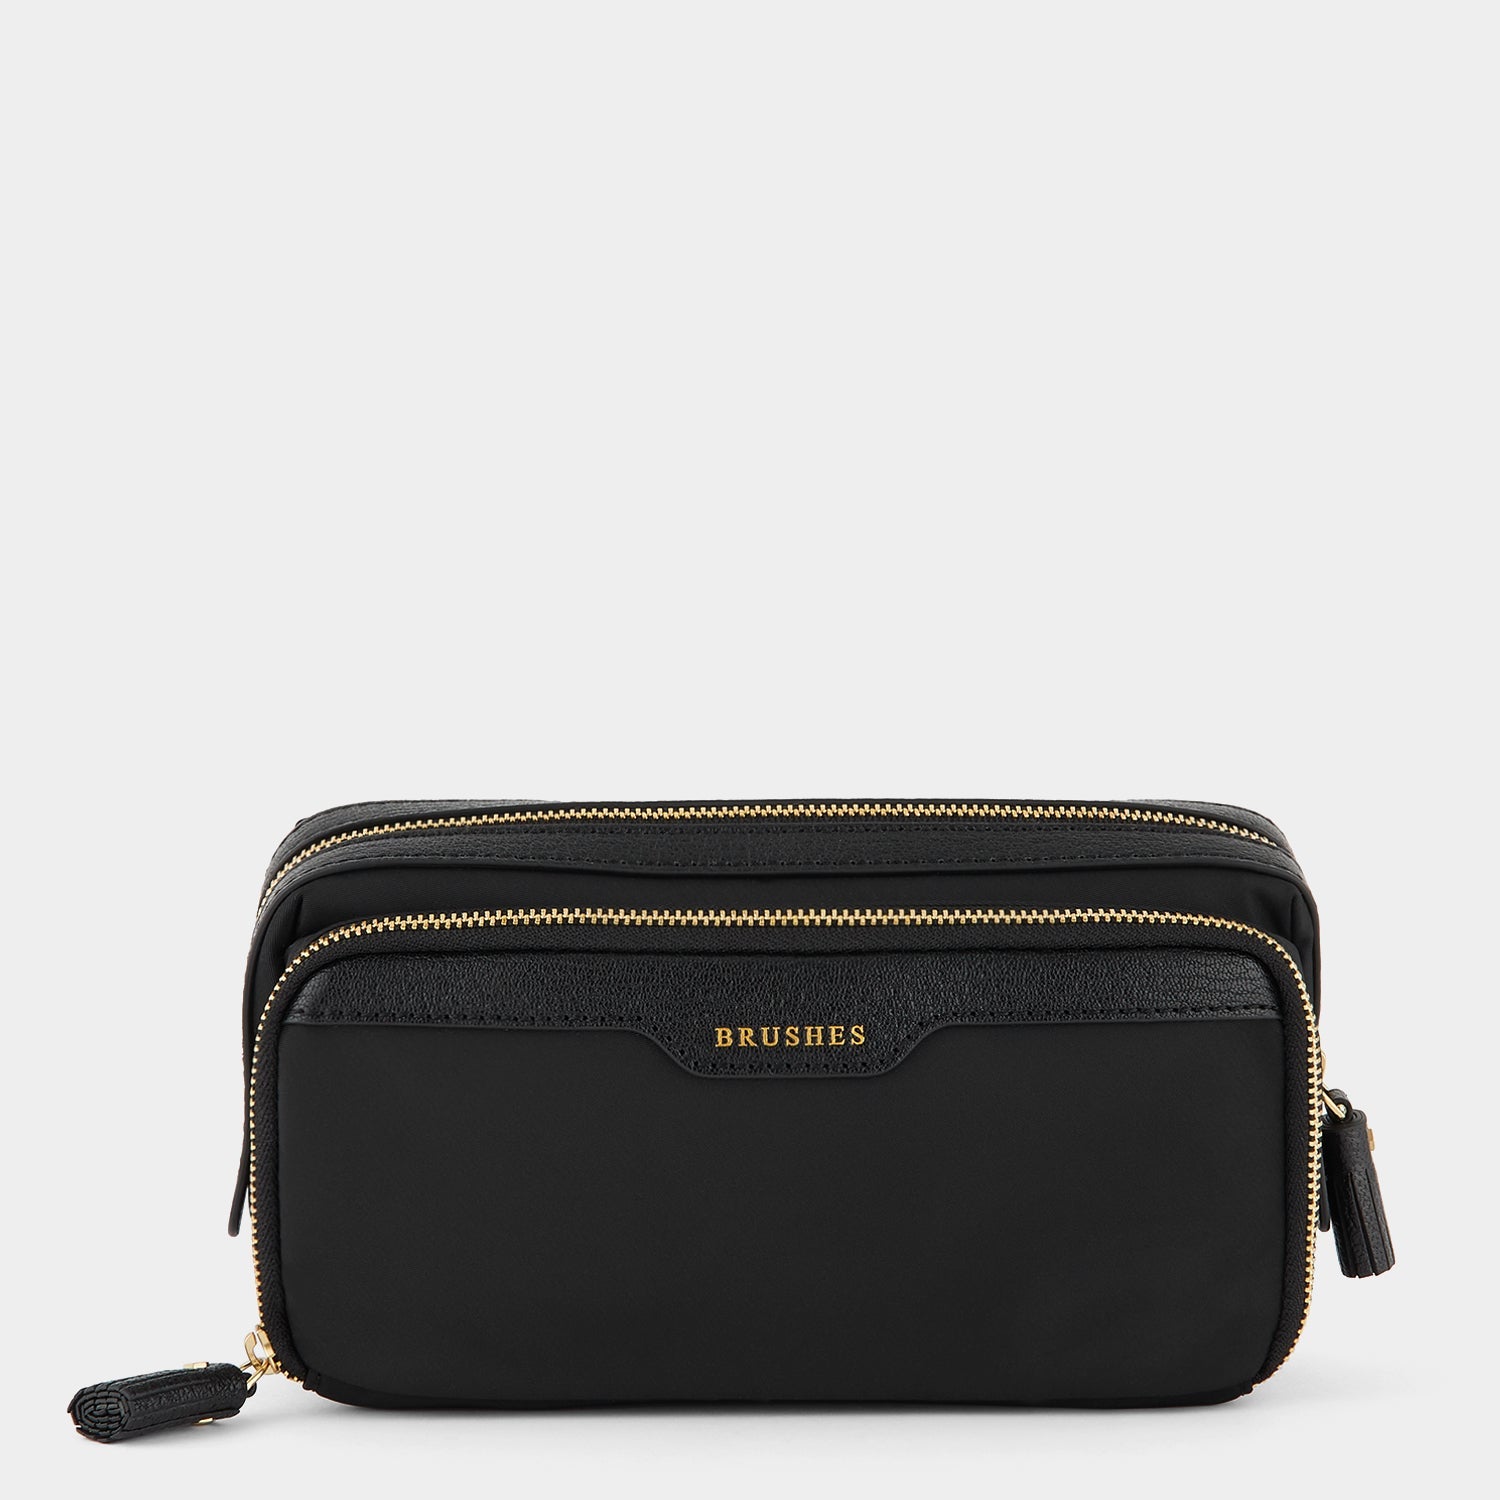 Anya Hindmarch Patent-leather Envelope Clutch in Black